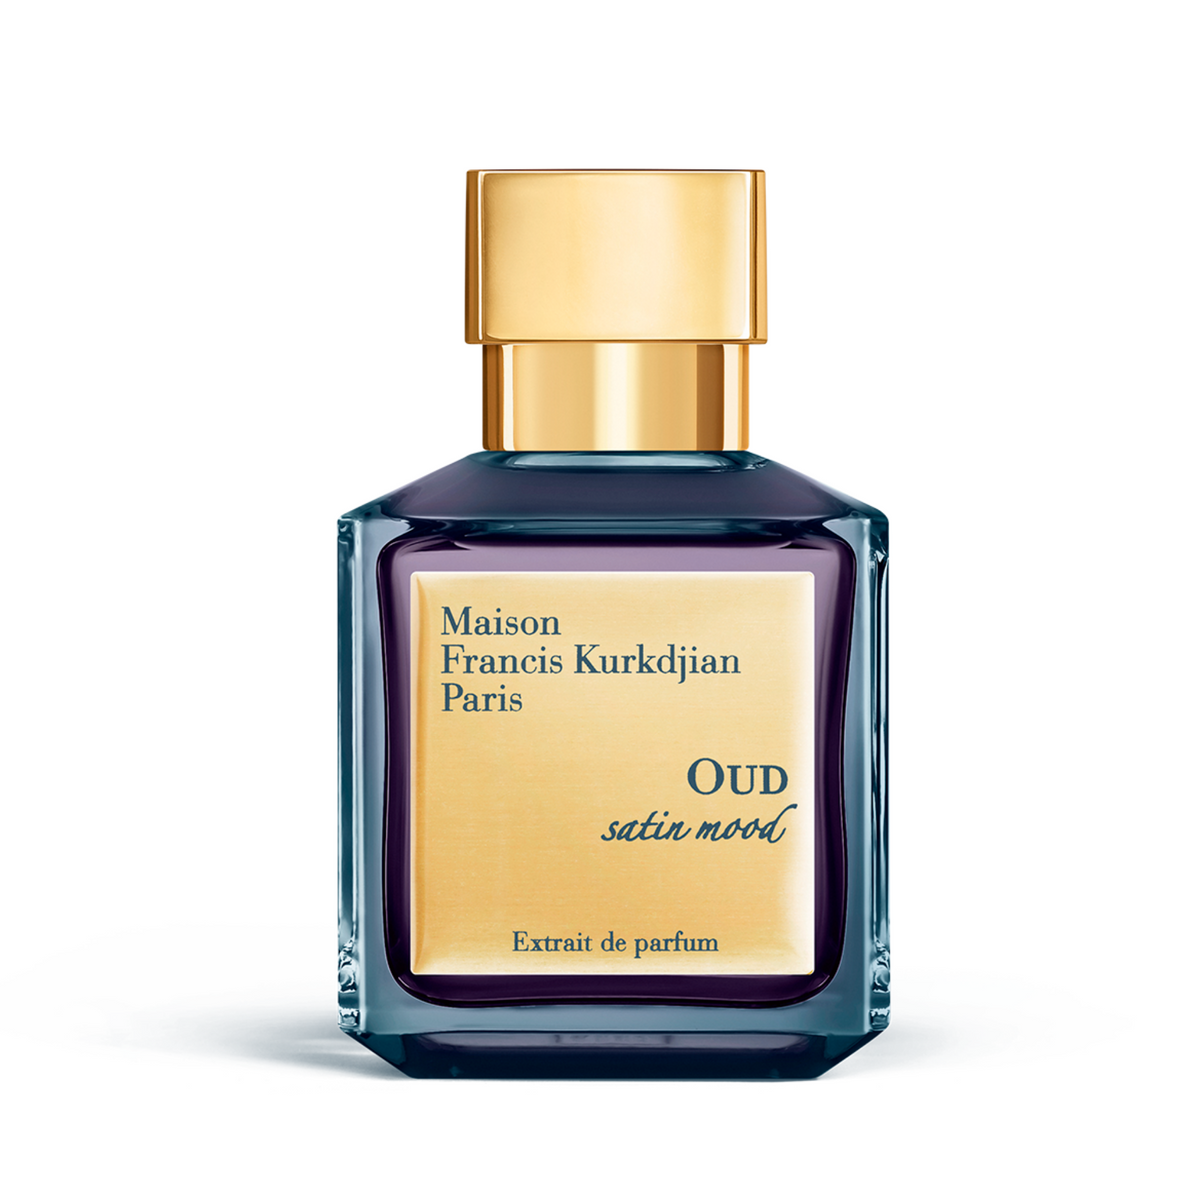 Primary image of Oud Satin Mood Extrait